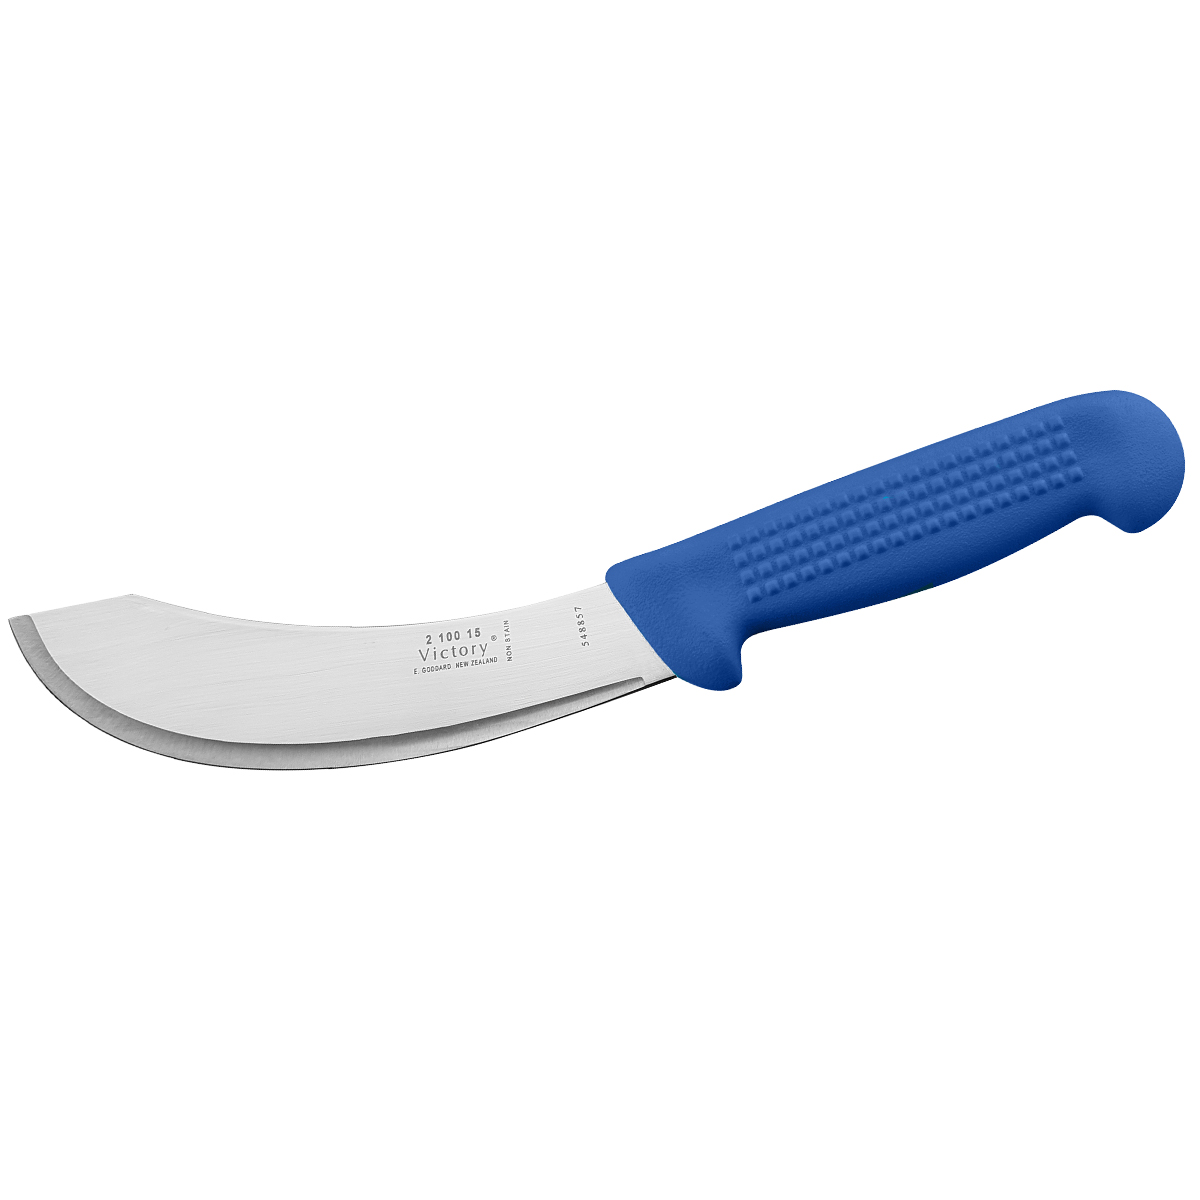 Victory Skinning Knife, 15cm (6) - Hollow Ground - Blue